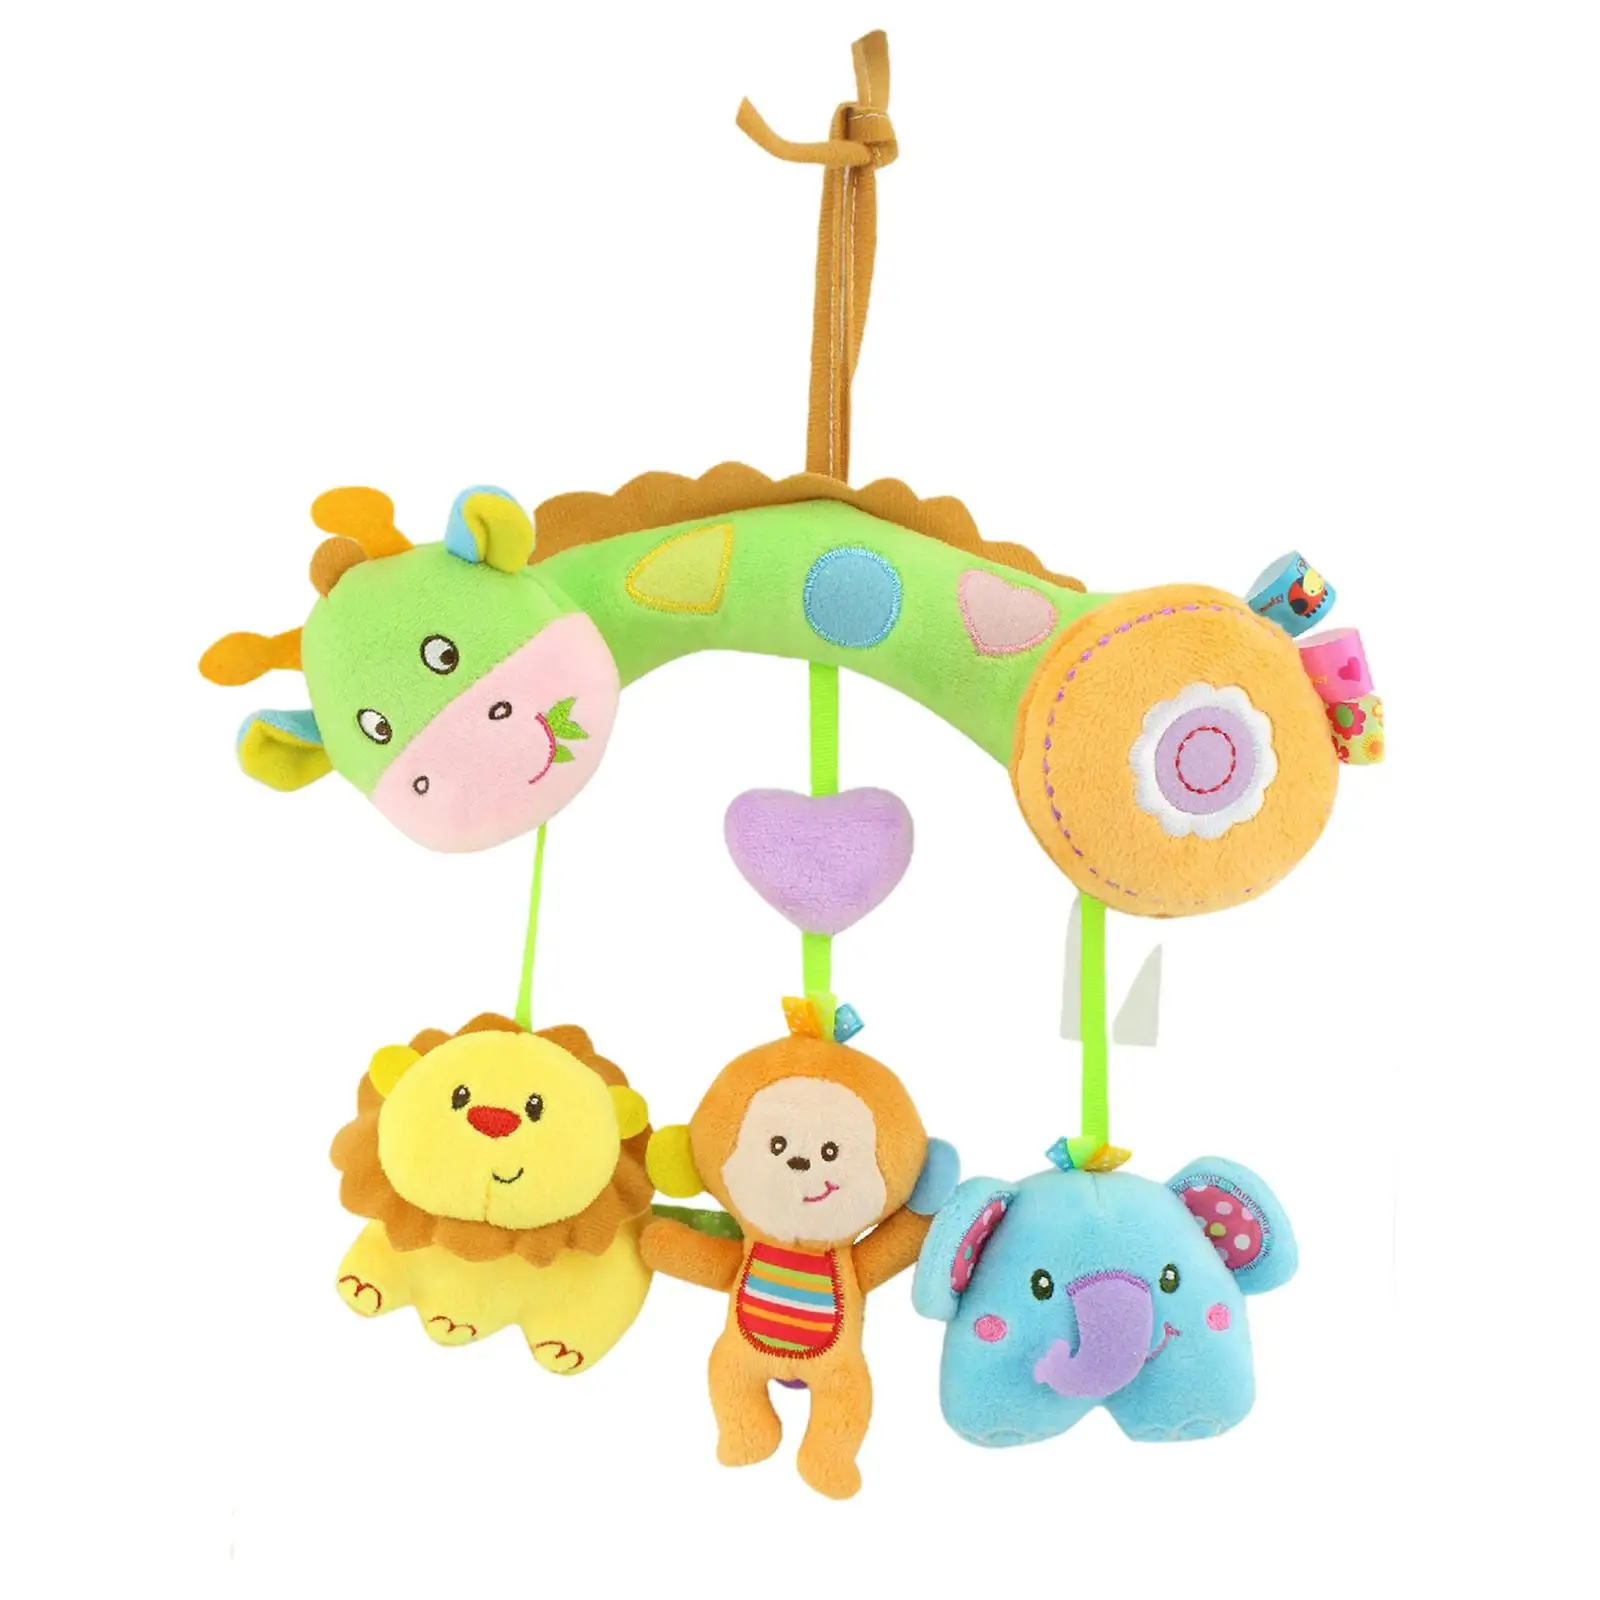 Animal Hanging Mobile Toys for Babies with Sound Stuffed Infant Toys Animal Rattles Plush Toy Baby Kids Rattle Toys